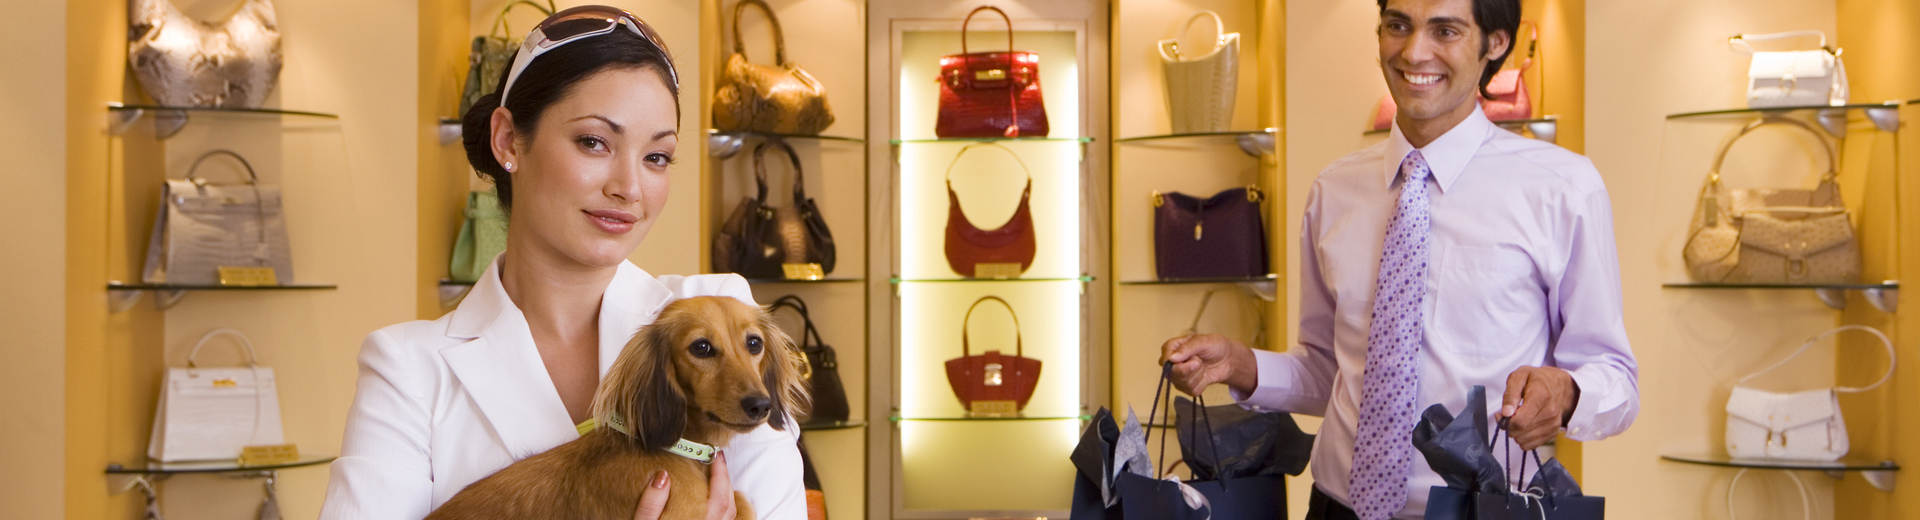 The Most Expensive Department Stores in the World - Lux & Concord